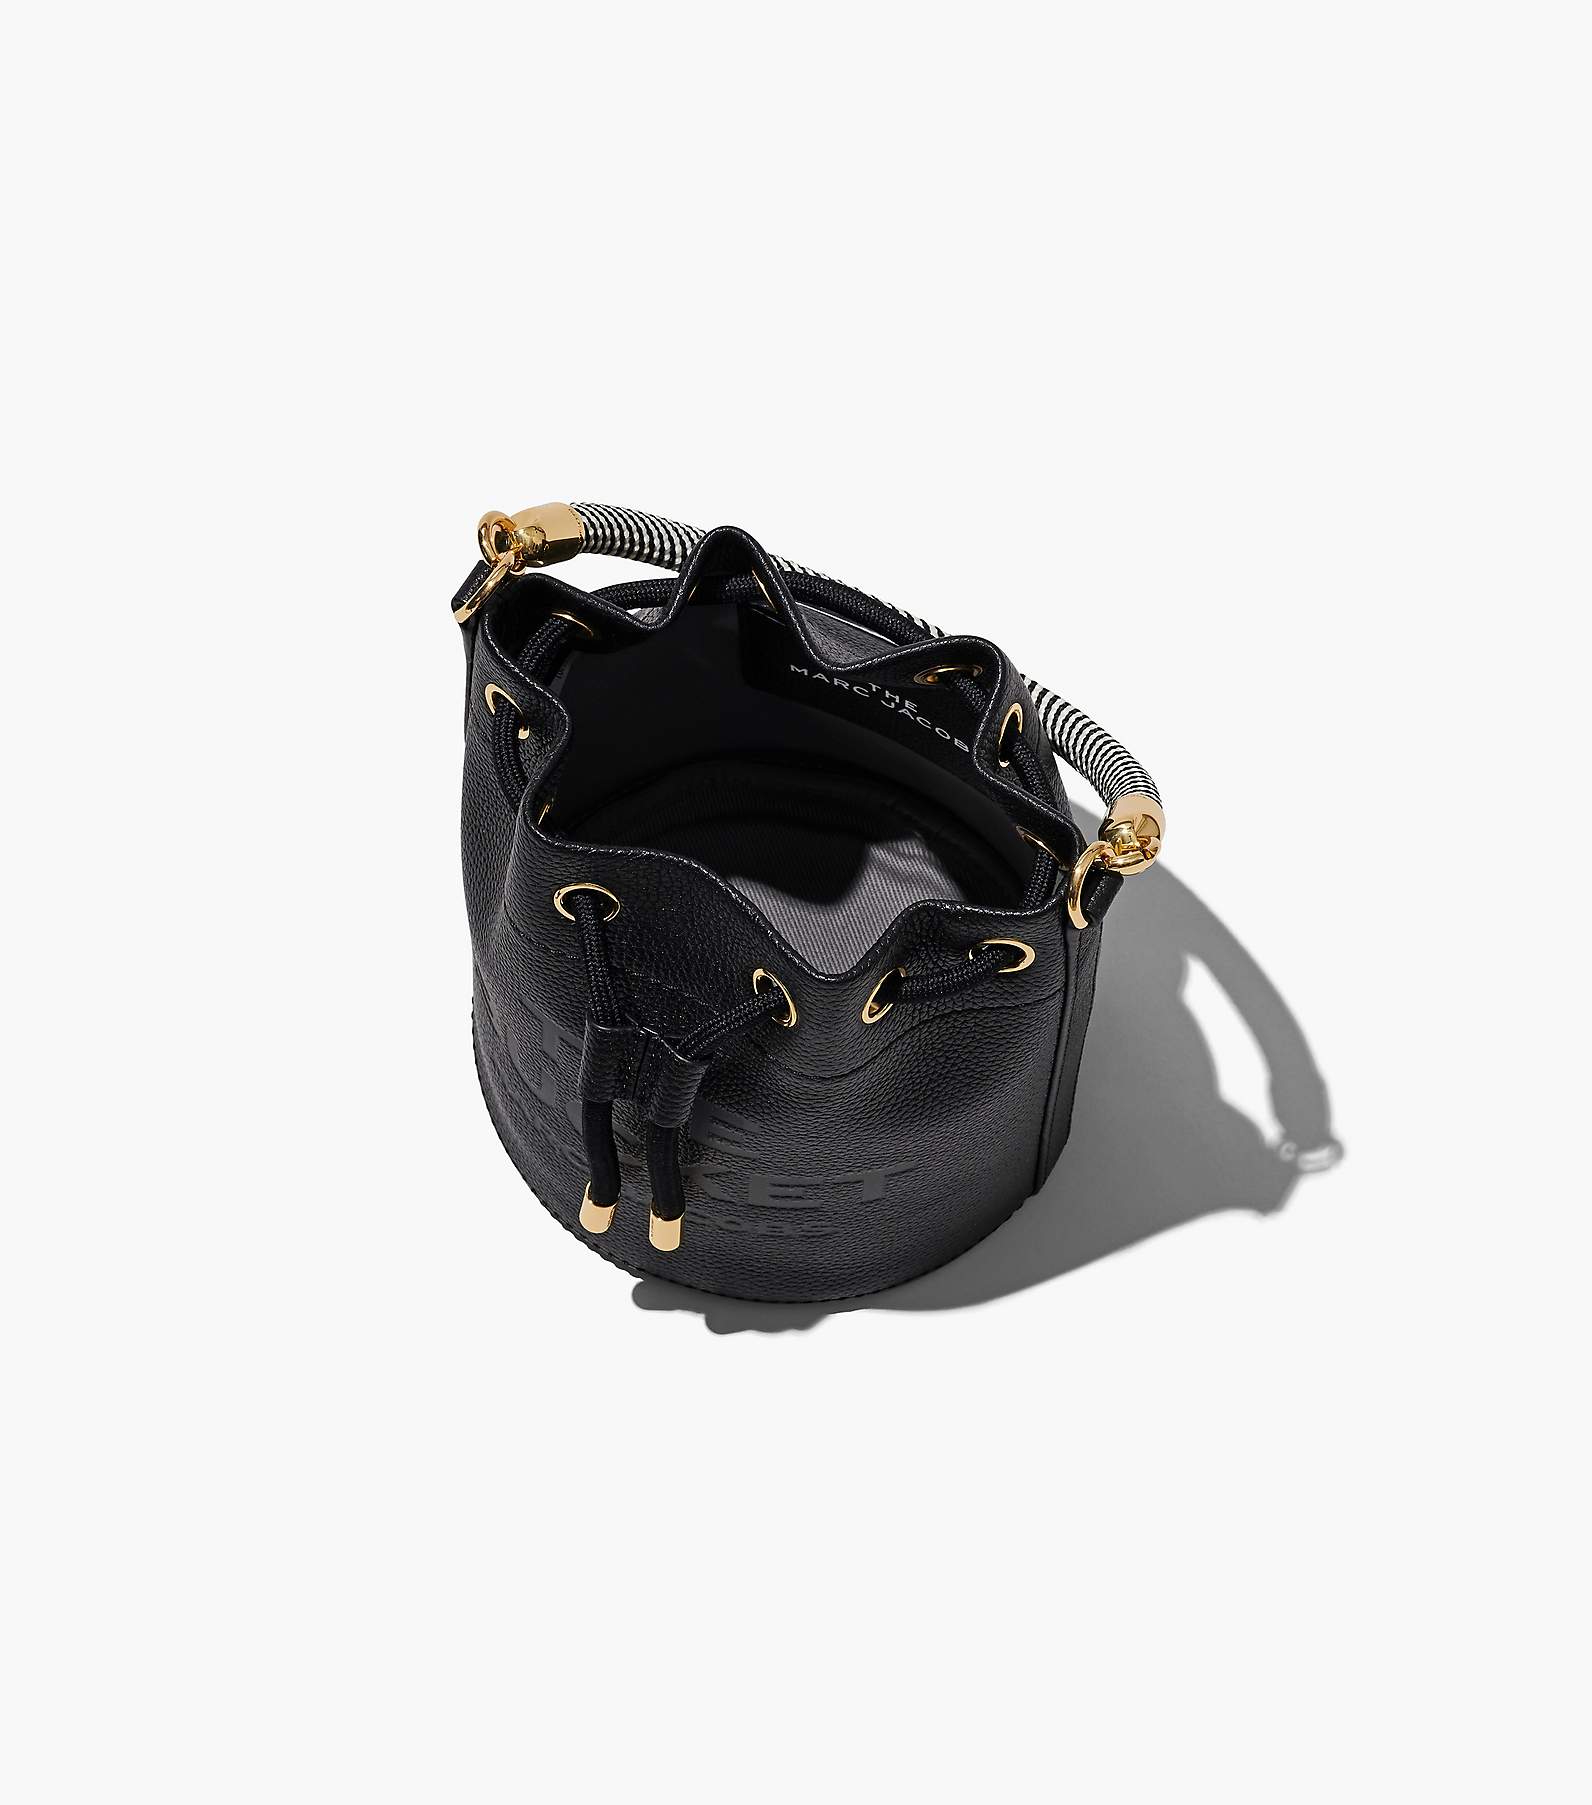 Marc Jacobs Women's The Leather Bucket Bag, Black, One Size